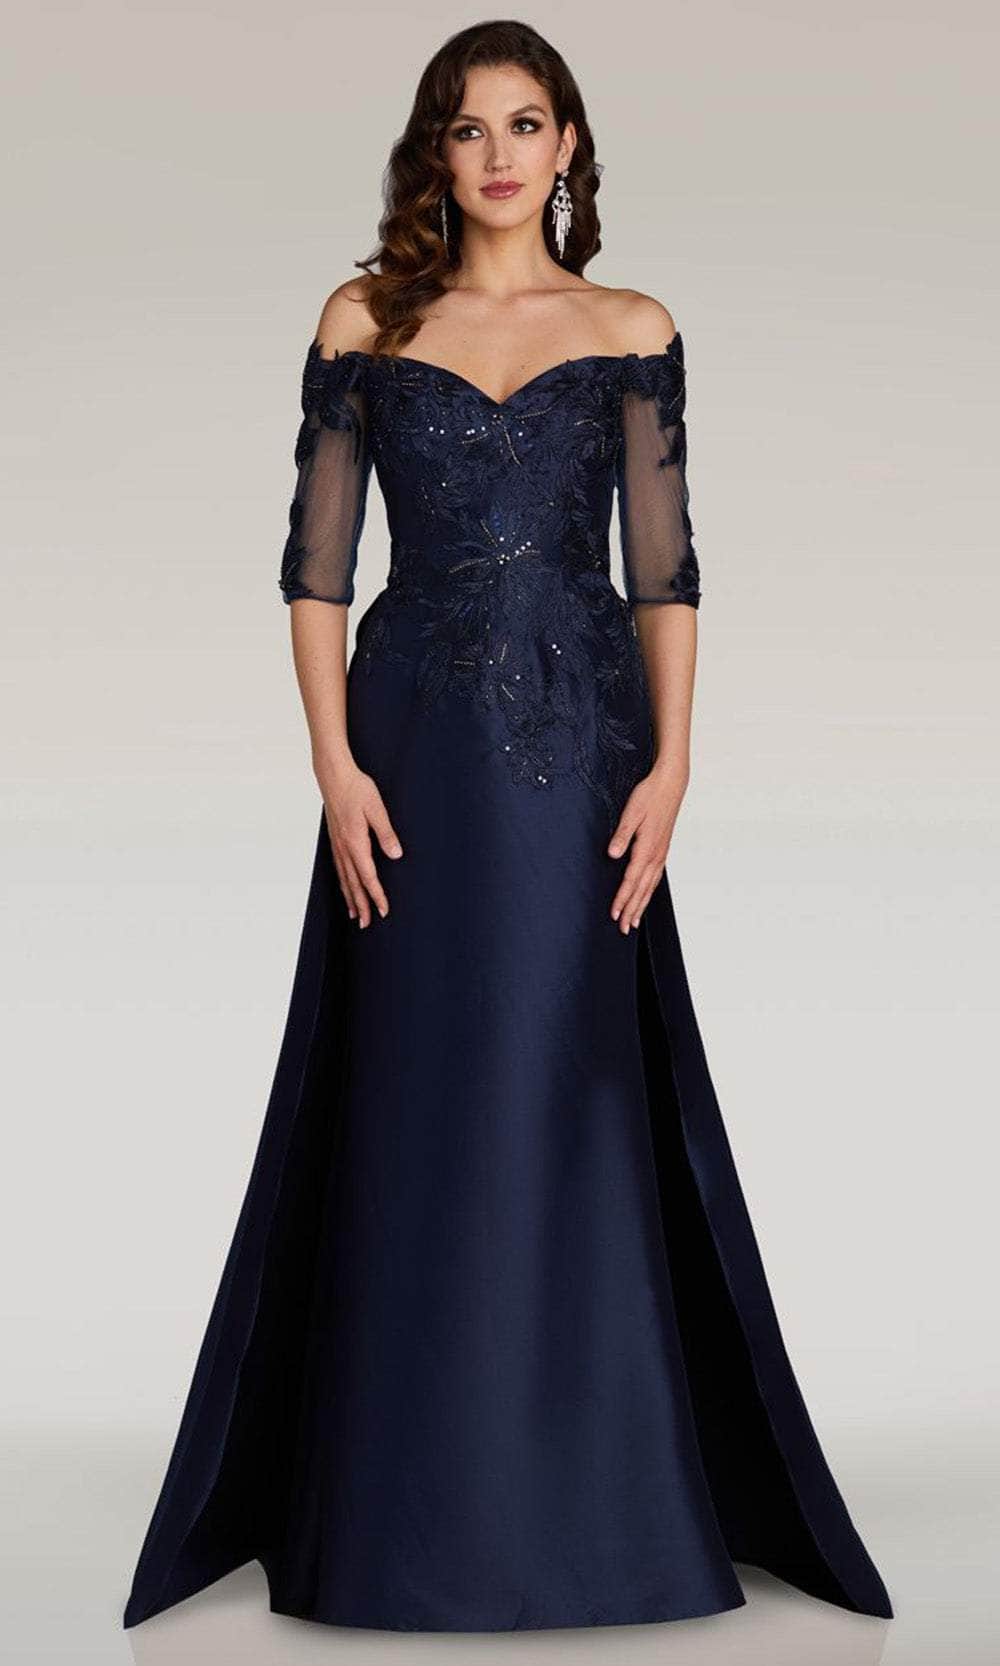 Feriani Couture 18390 - Illusion Sleeve Overskirt Formal Gown
